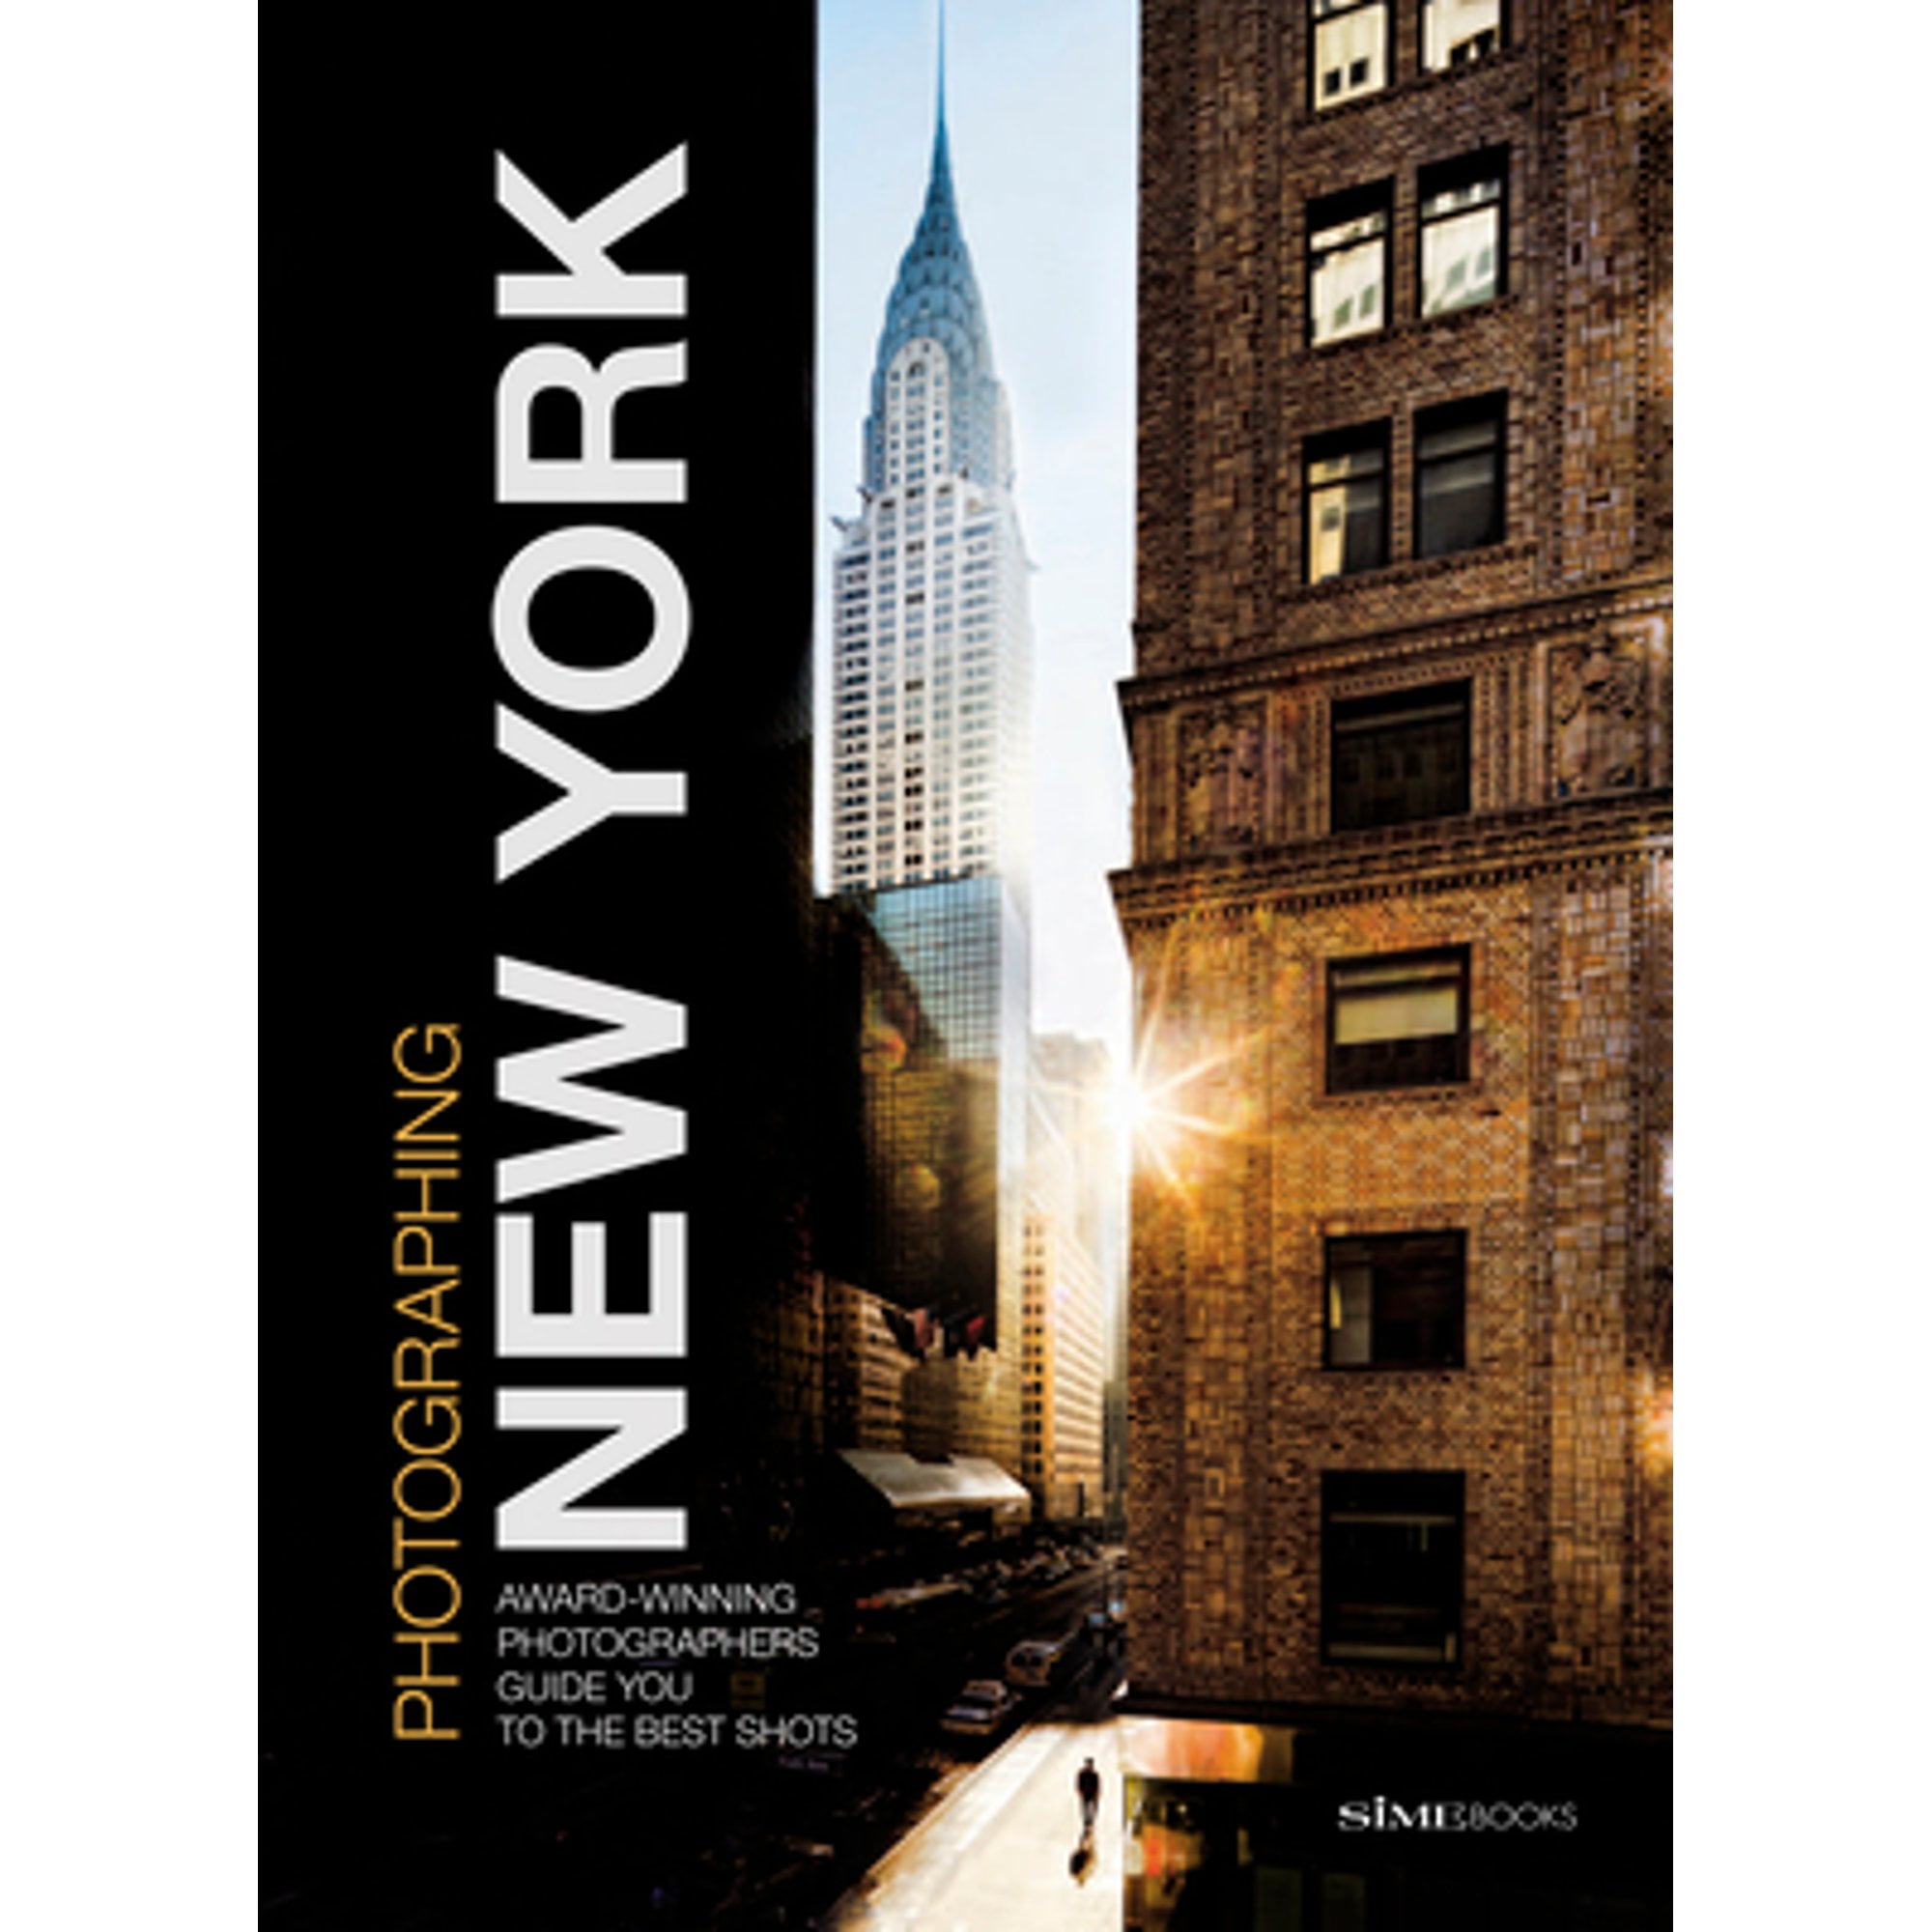 Pre-Owned Photographing: New York: Award-Winning Photographers Show You How to Get the Best Shots (Paperback 9788899180553) by Simephoto (Photographer), Giovanni Simeone, Carlo Irek